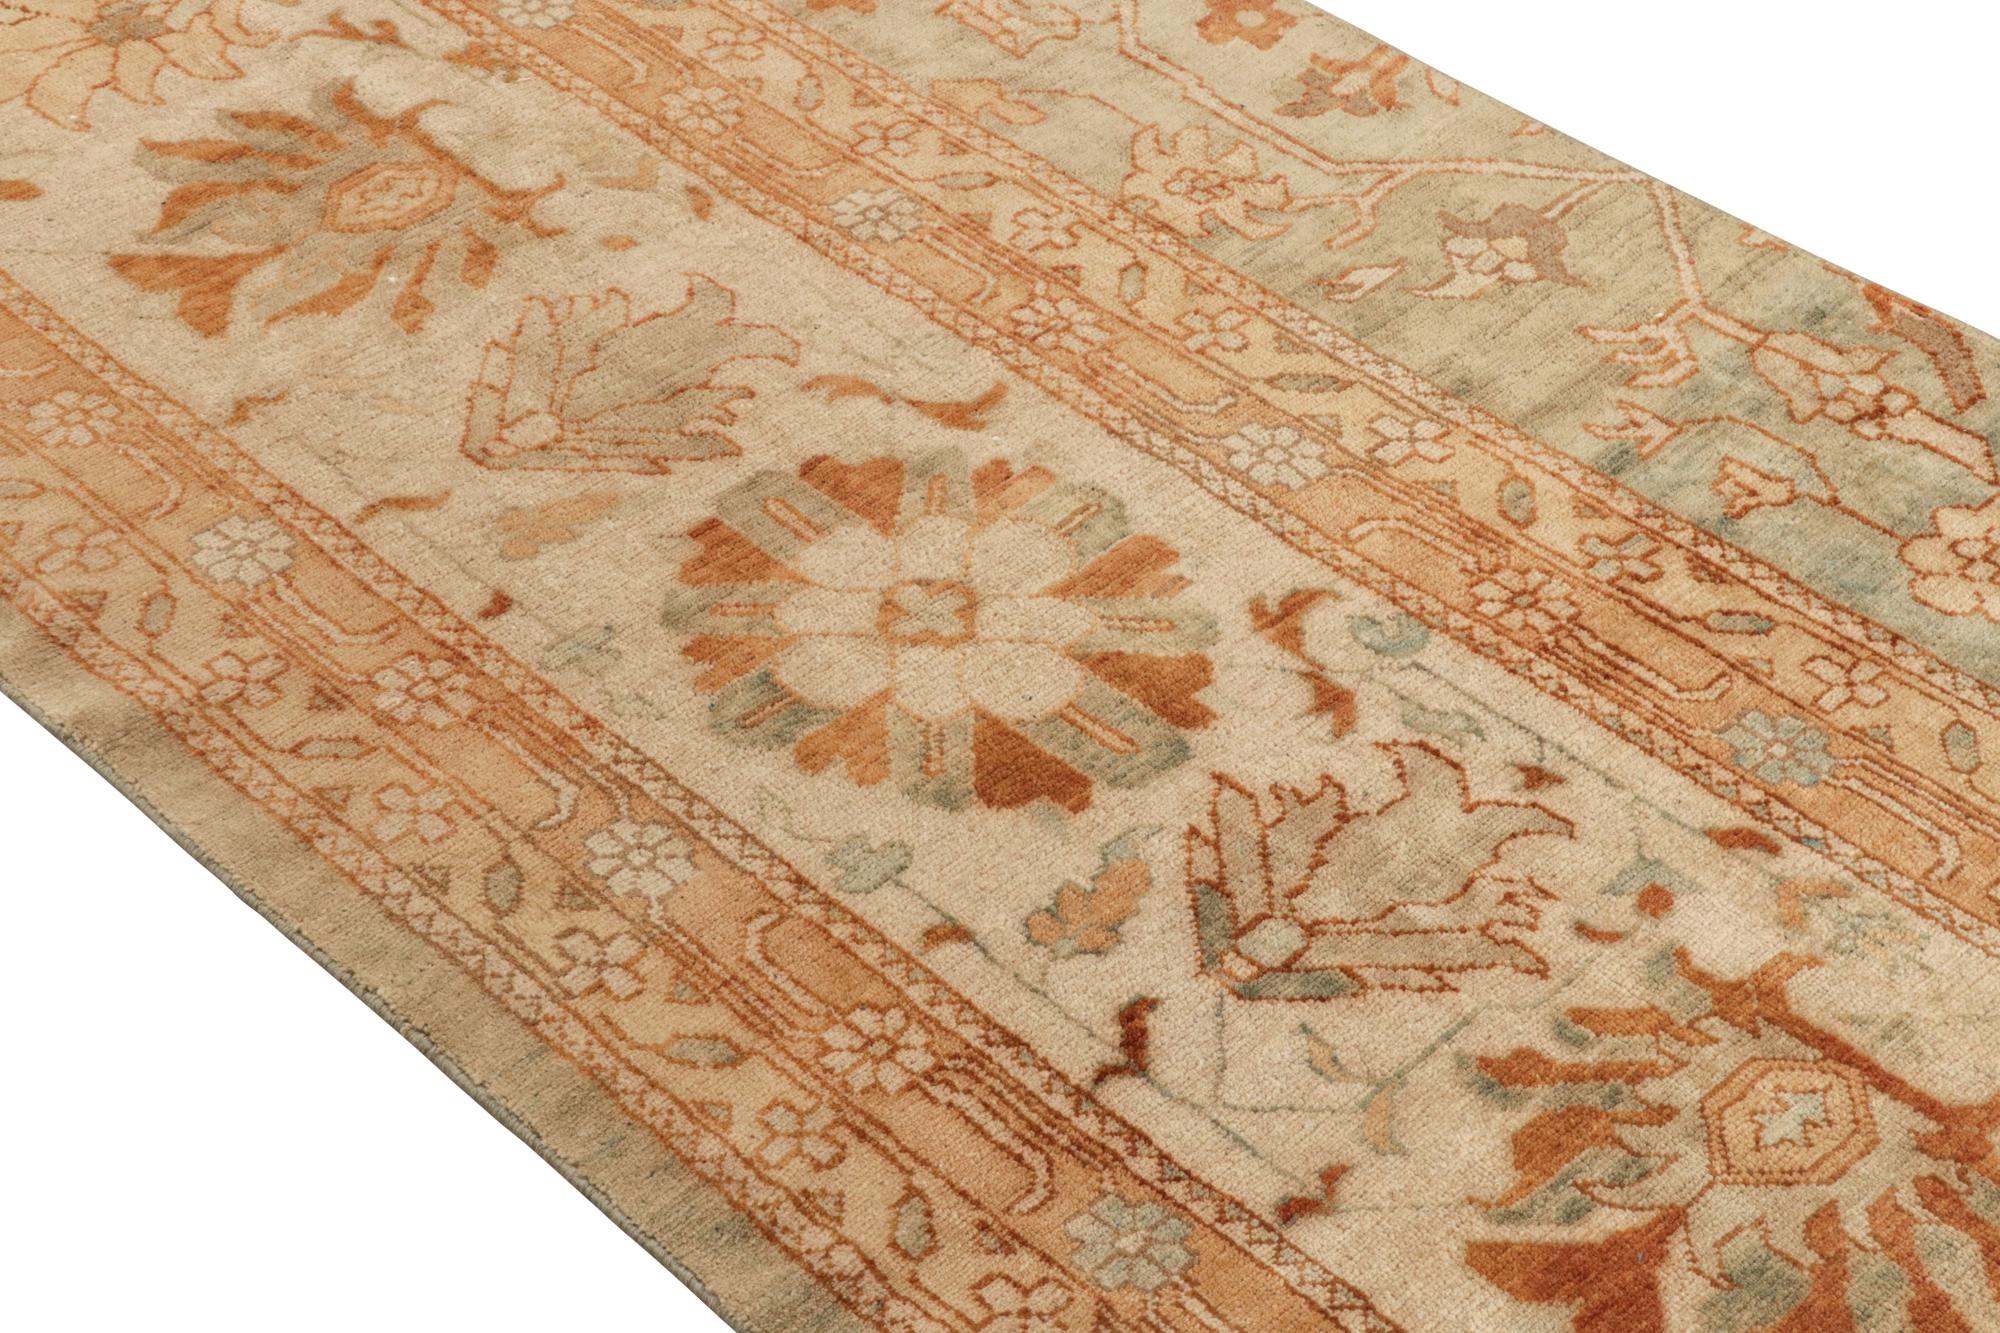 A 4x22 extra long runner sampler inspired by Sultanabad Persian rugs—from Rug & Kilim’s Modern Classics Collection. Hand-knotted in wool, playing a confluence of warm tones in floral patterns with classic grace.

Further On the Design:

The play of